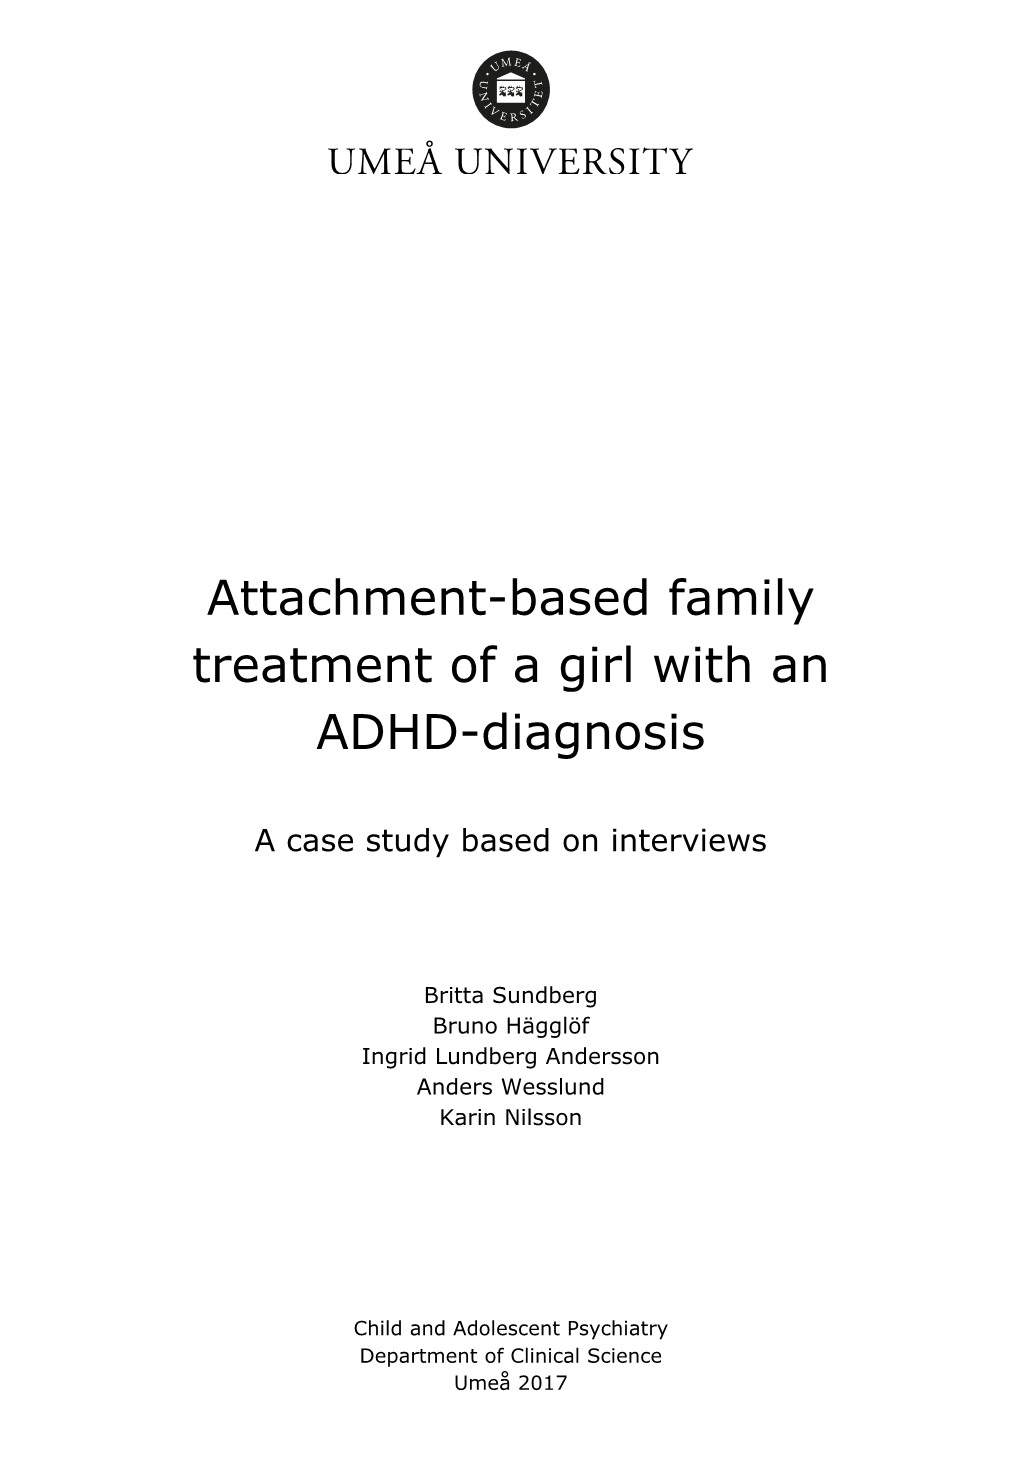 Attachment-Based Family Treatment of a Girl with an ADHD-Diagnosis